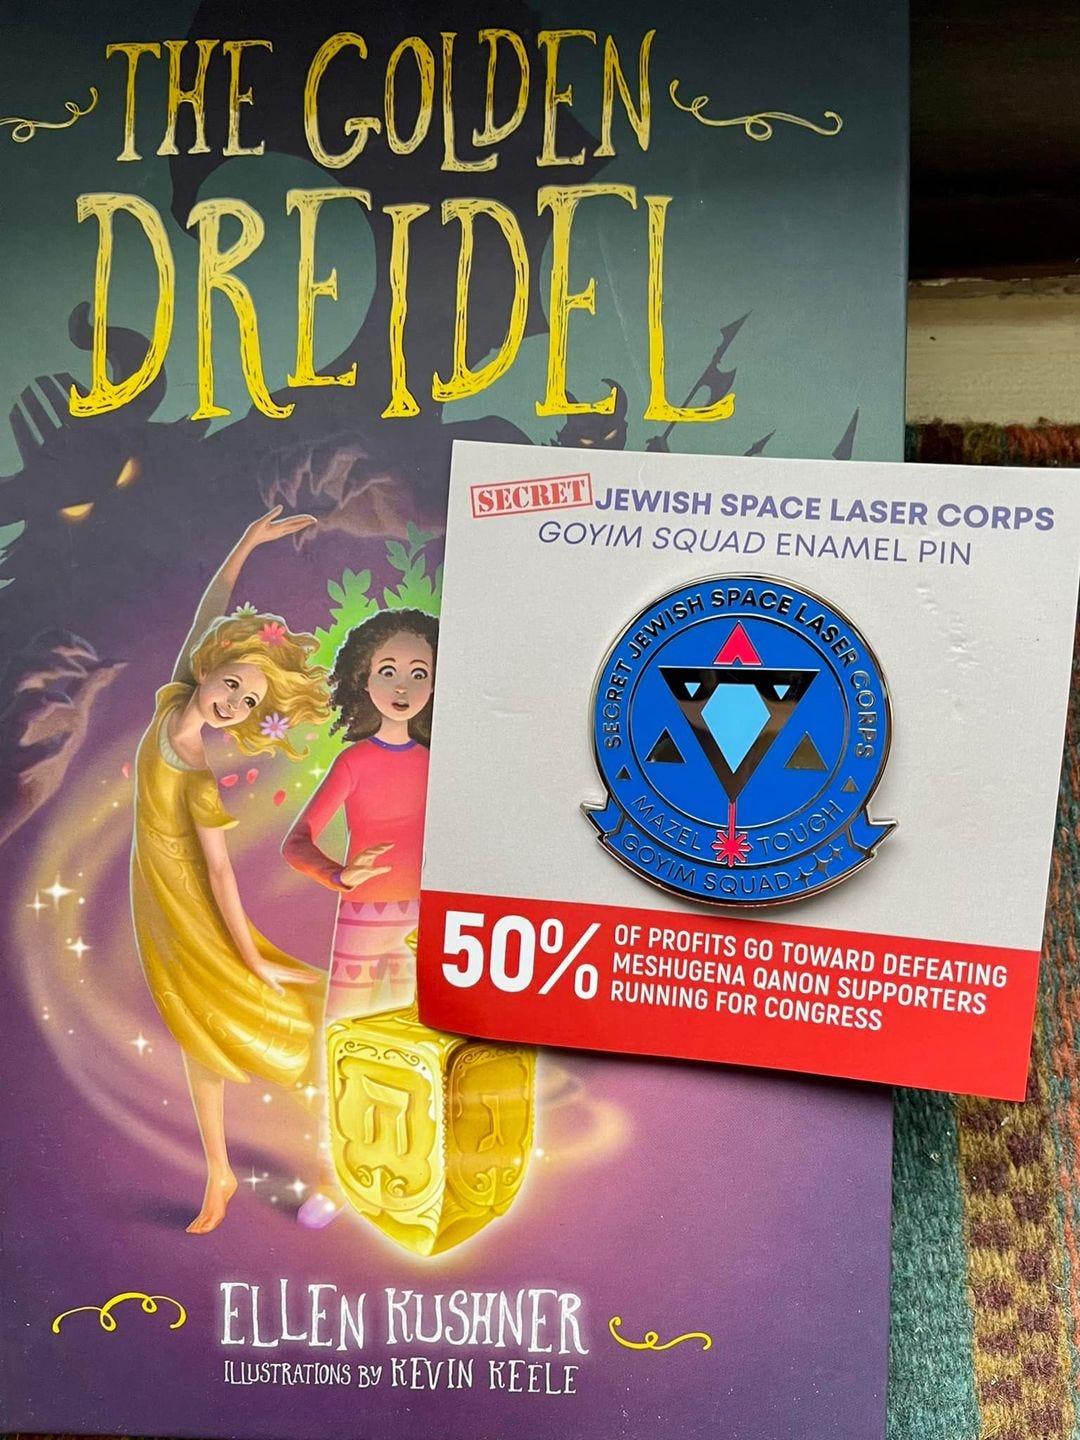 May be an image of text that says 'THE GOLDENE DREIDEL SECRET JEWISH SPACE LASER CORPS GOYIM SQUAD ENAMEL PIN EW LASEF GANE GOYIM 50% OF PROFITS MESHUGENA GO TOWARD SUPPORTERS DEFEATING RUNNING FOR CONGRESS QANON ELLEN KUSHNER e ILLUSTRATIONS By KEVIN KEELE'